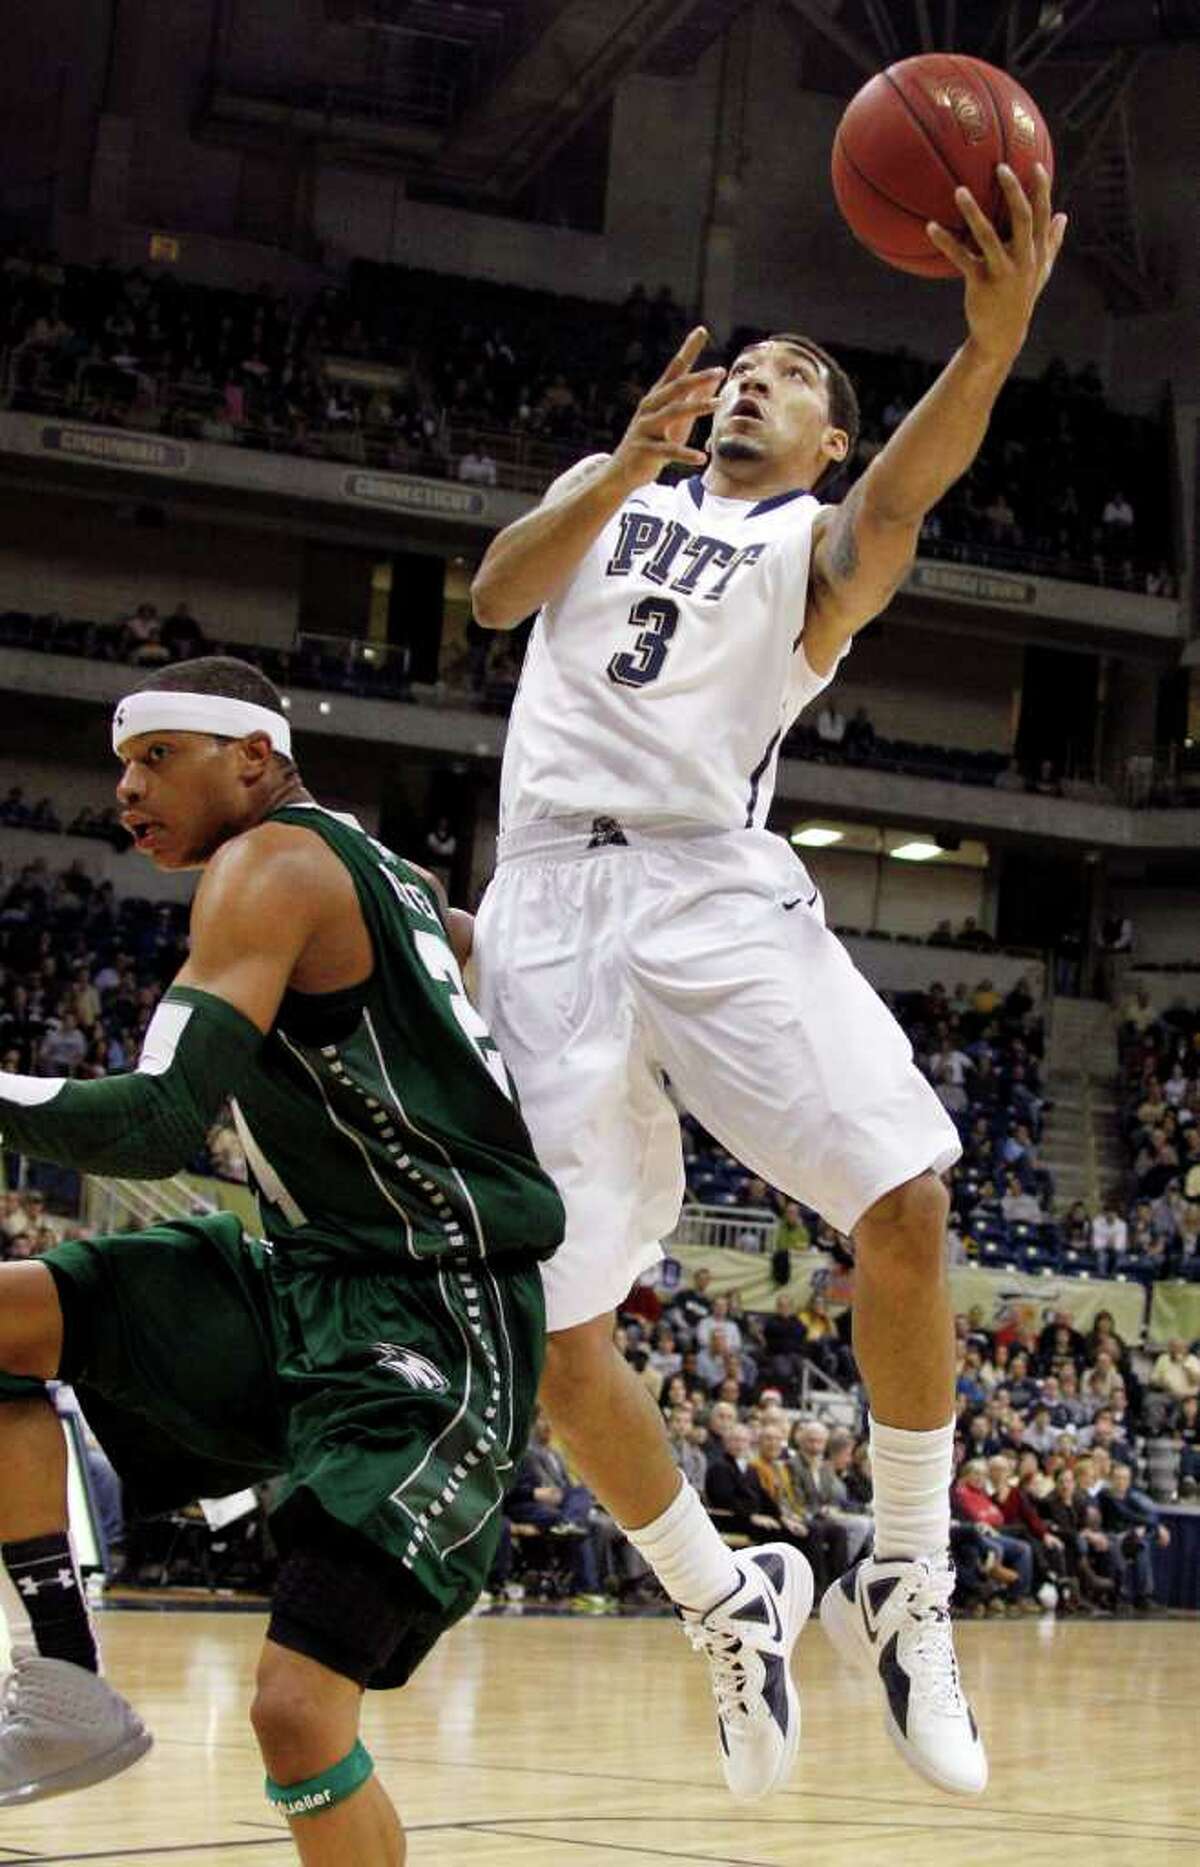 Pittsburgh's Cameron Wright (3) goes in for a layup behind Wagner's Latif Rivers in the first half of the NCAA college basketball game on Friday, Dec. 23, 2011, in Pittsburgh. (AP Photo/Keith Srakocic)